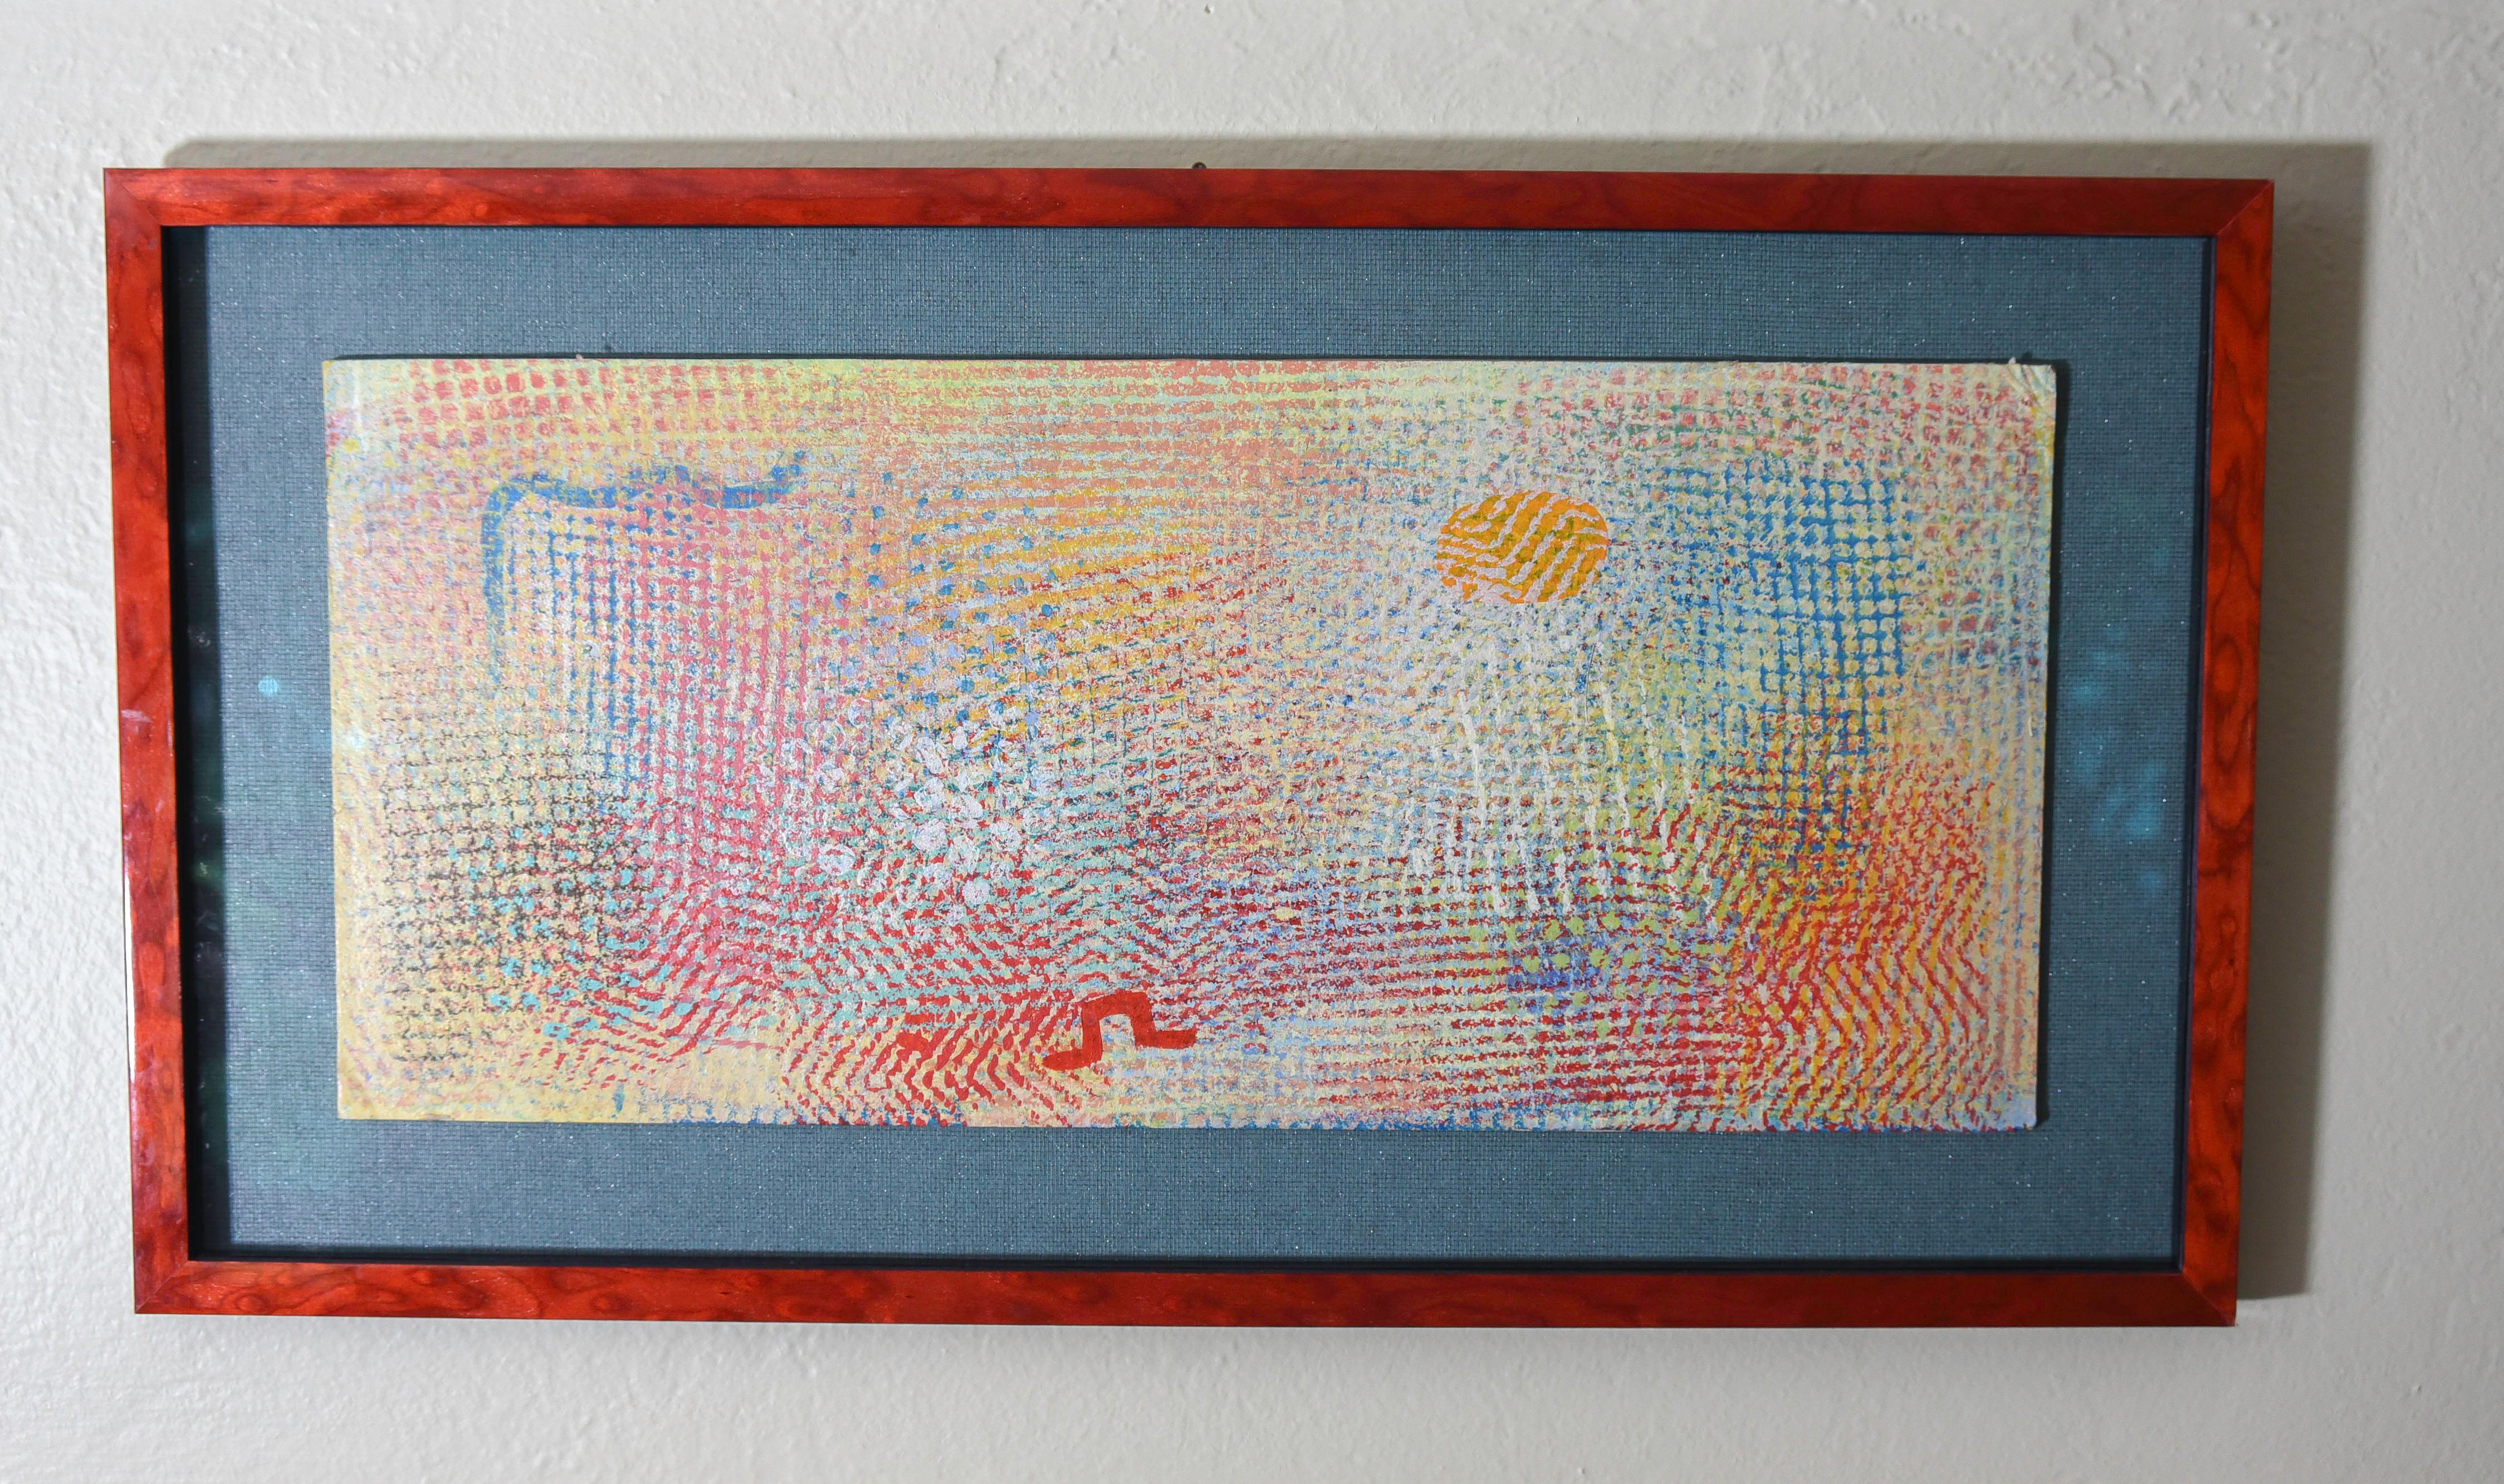 Robert Natkin - Small/Near Miniature 1970s Abstract Impressionist Painting- 9661 In Good Condition For Sale In Ukiah, CA